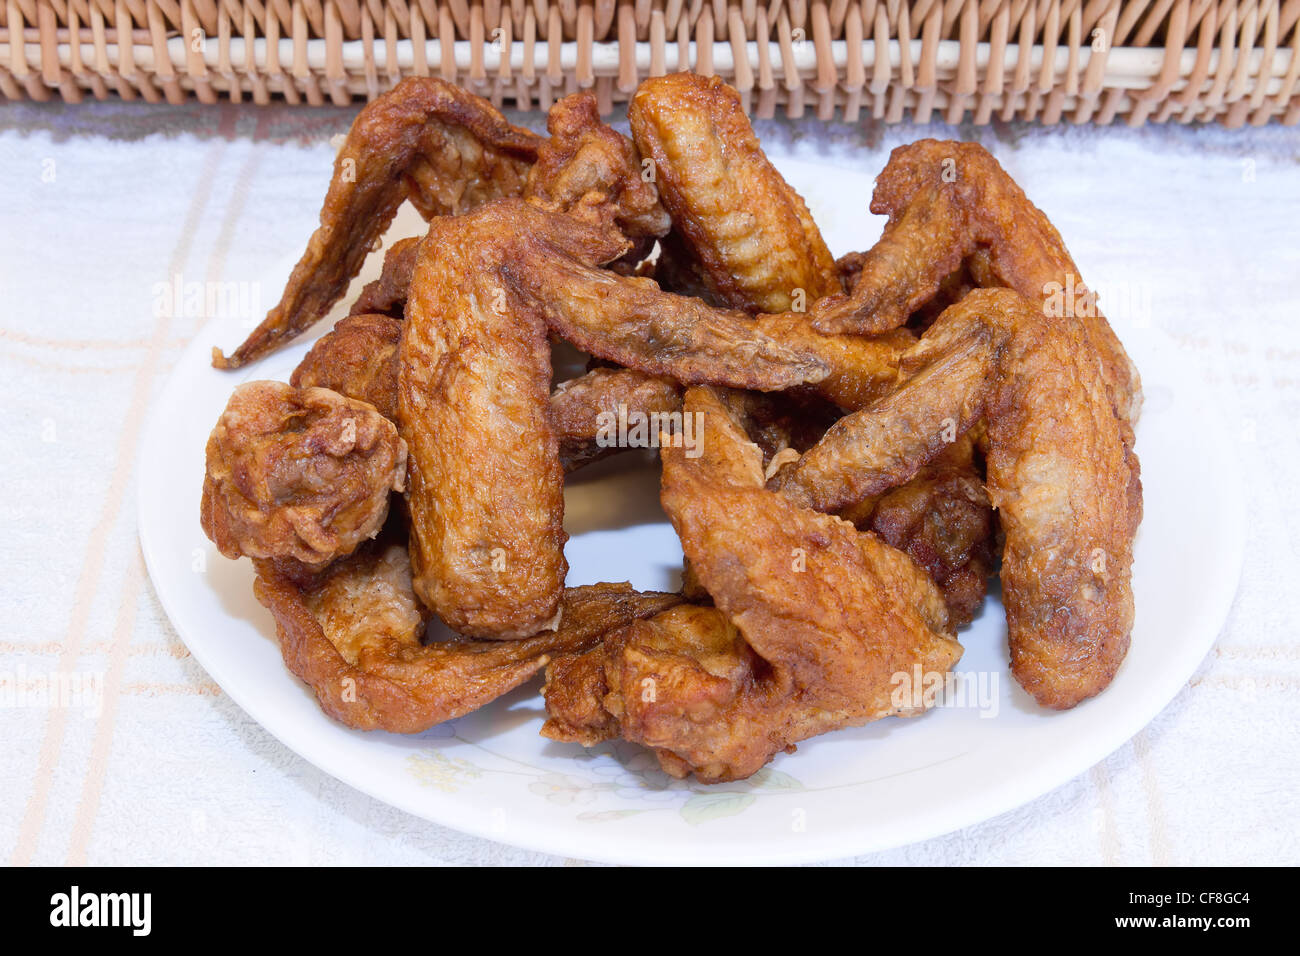 Plate of Deep Fried Chicken Wings by Picnic Basket Stock Photo